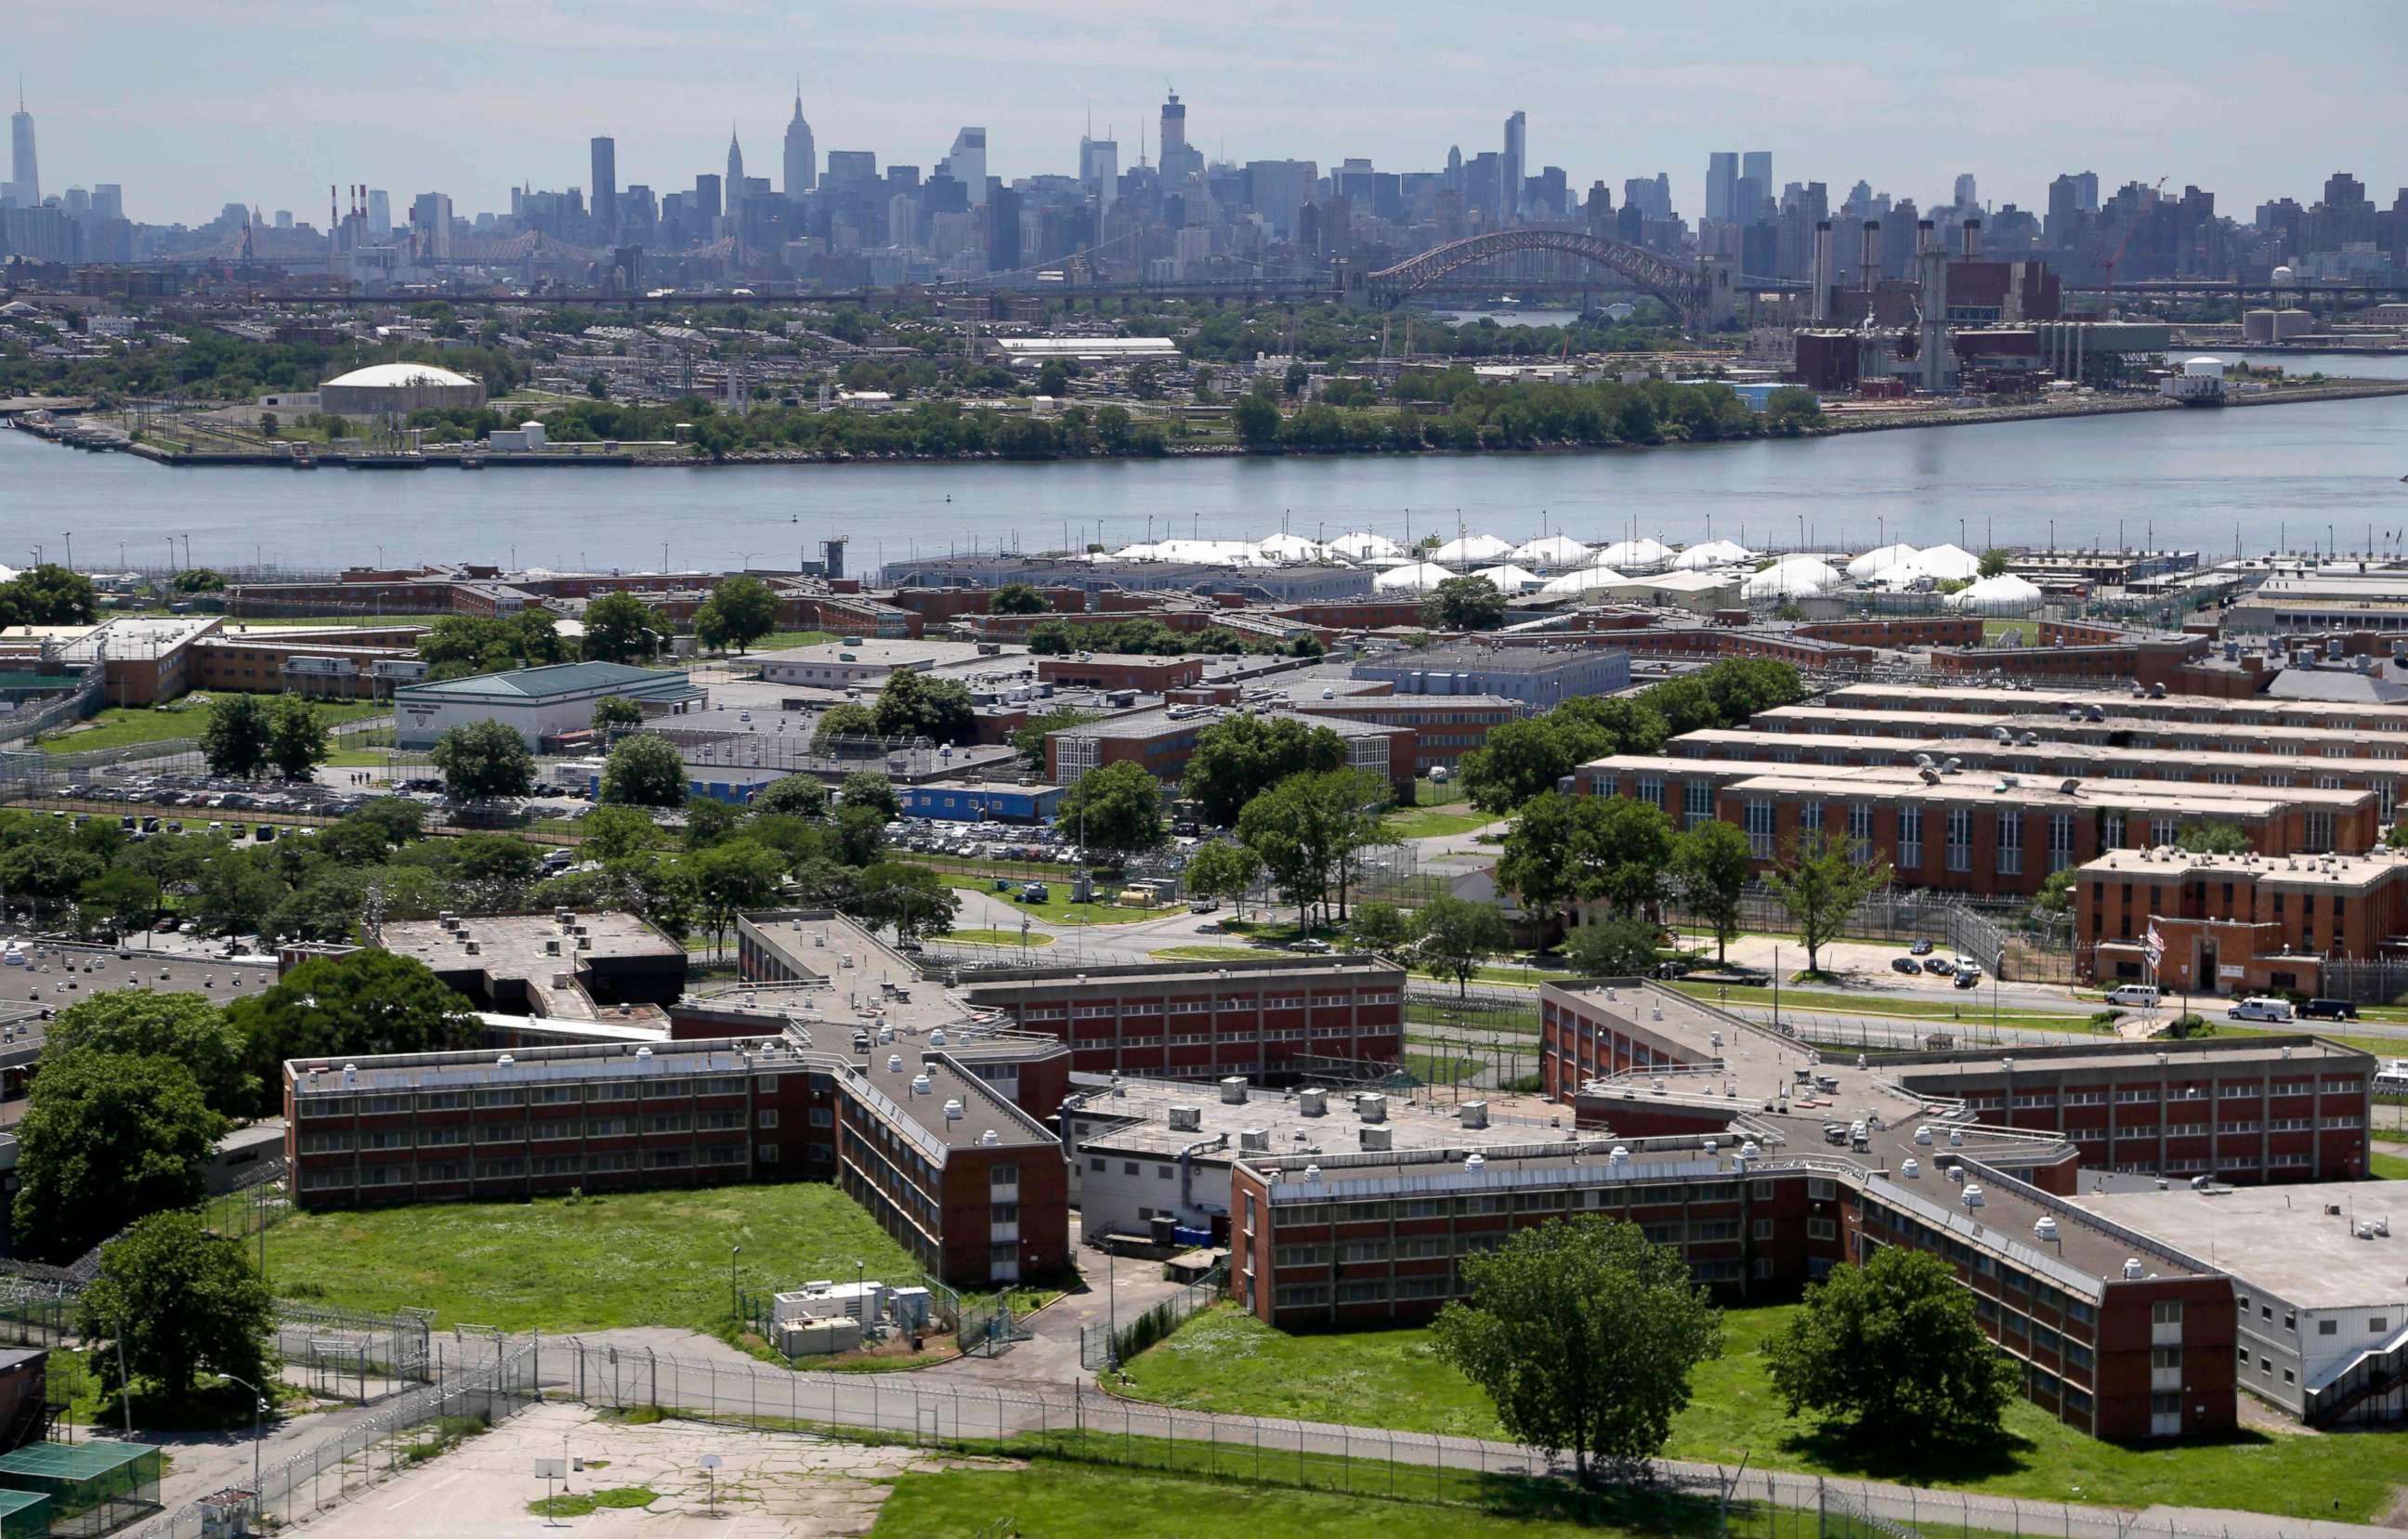 PHOTO: This June 20, 2014 file photo shows the Rikers Island jail complex in New York with the Manhattan skyline in the background.